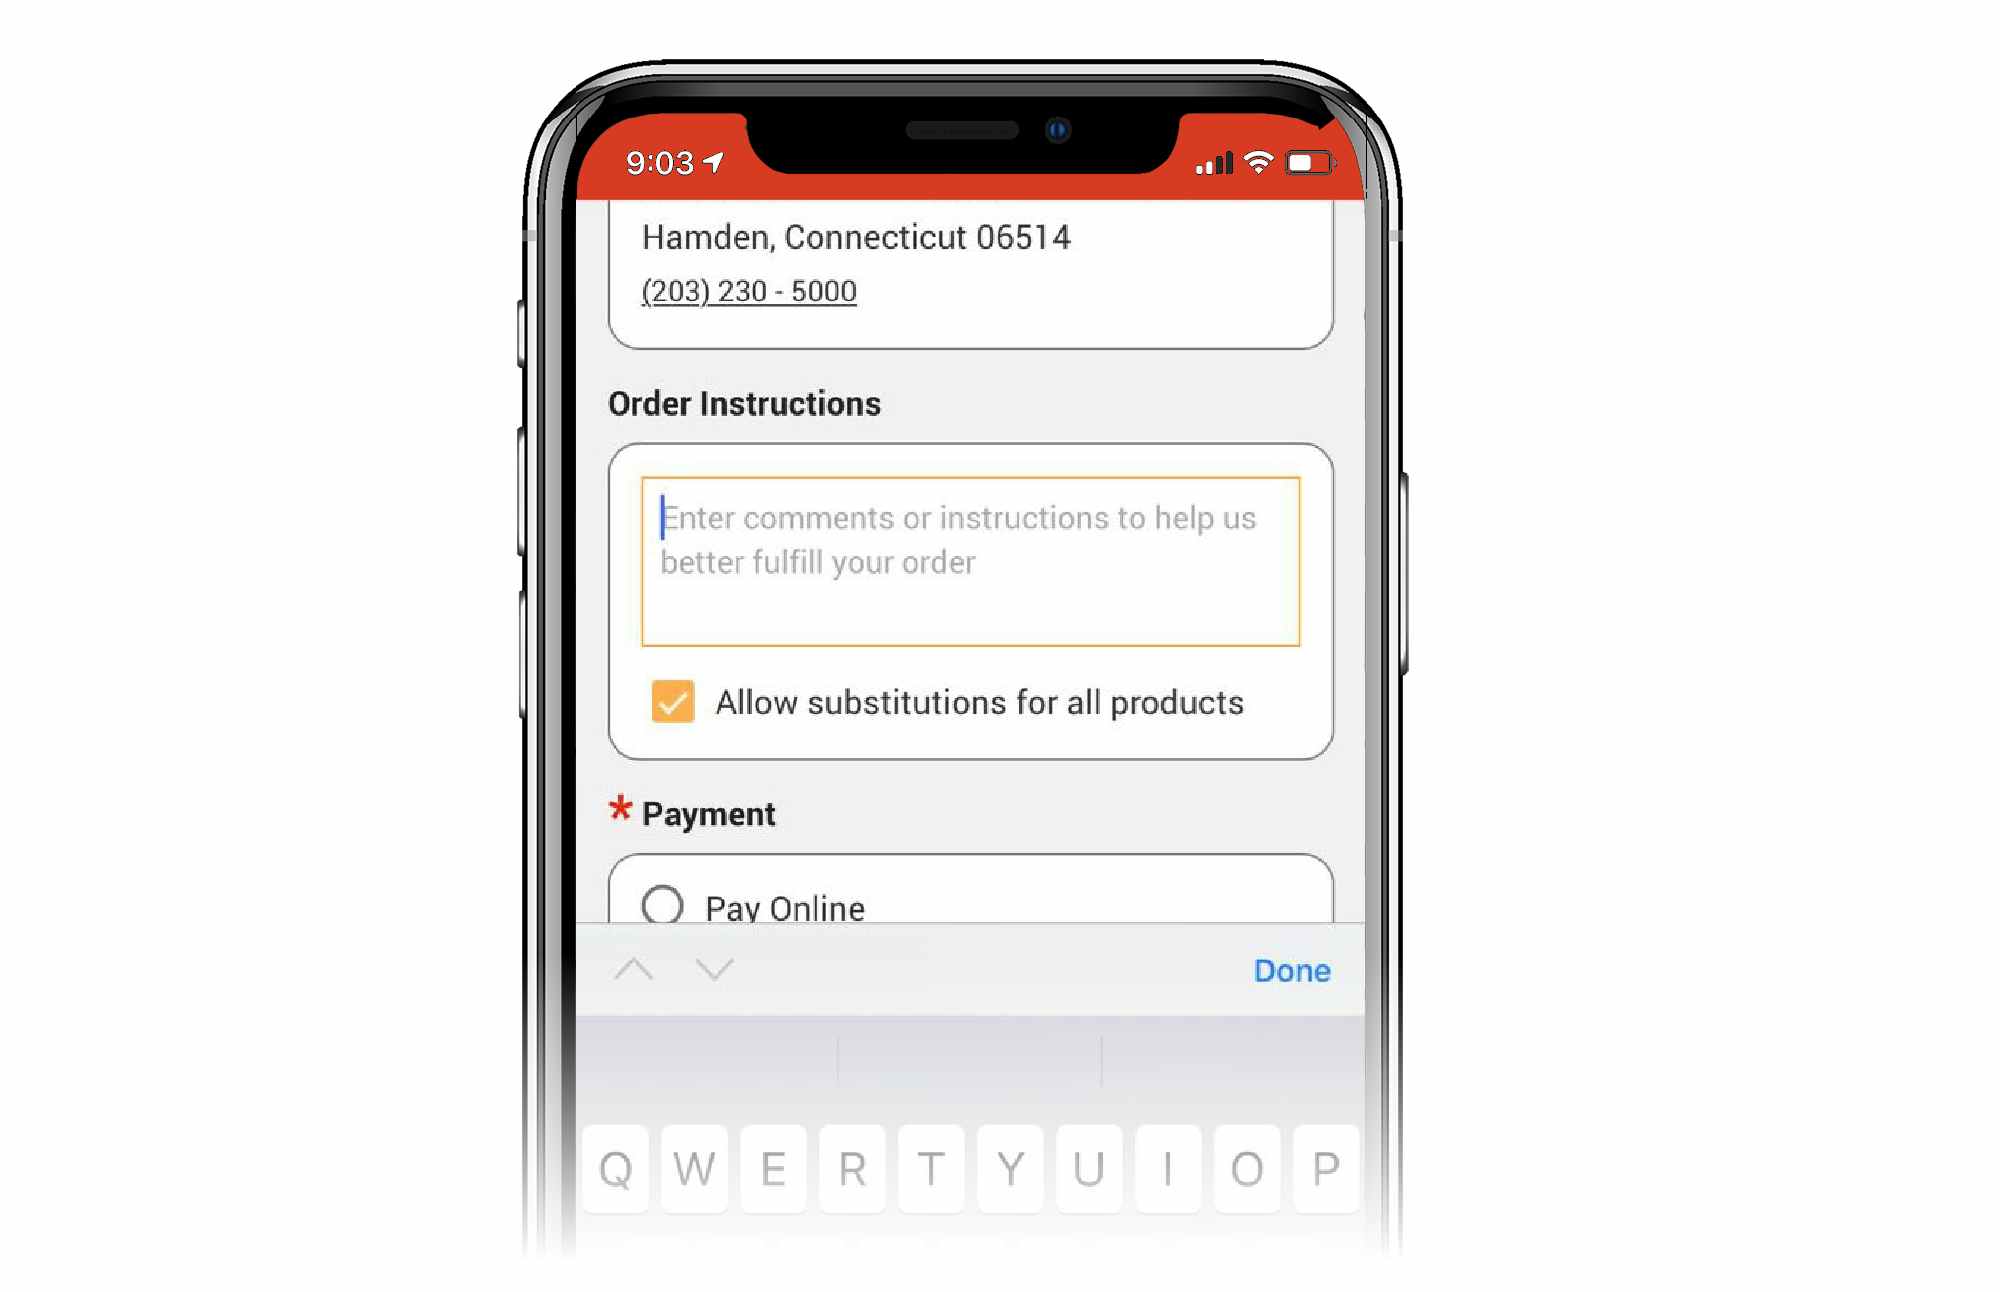 phone screen showing shoprite app with order instructions box and cursor inside. box below allowing for substitutions on all products is checked